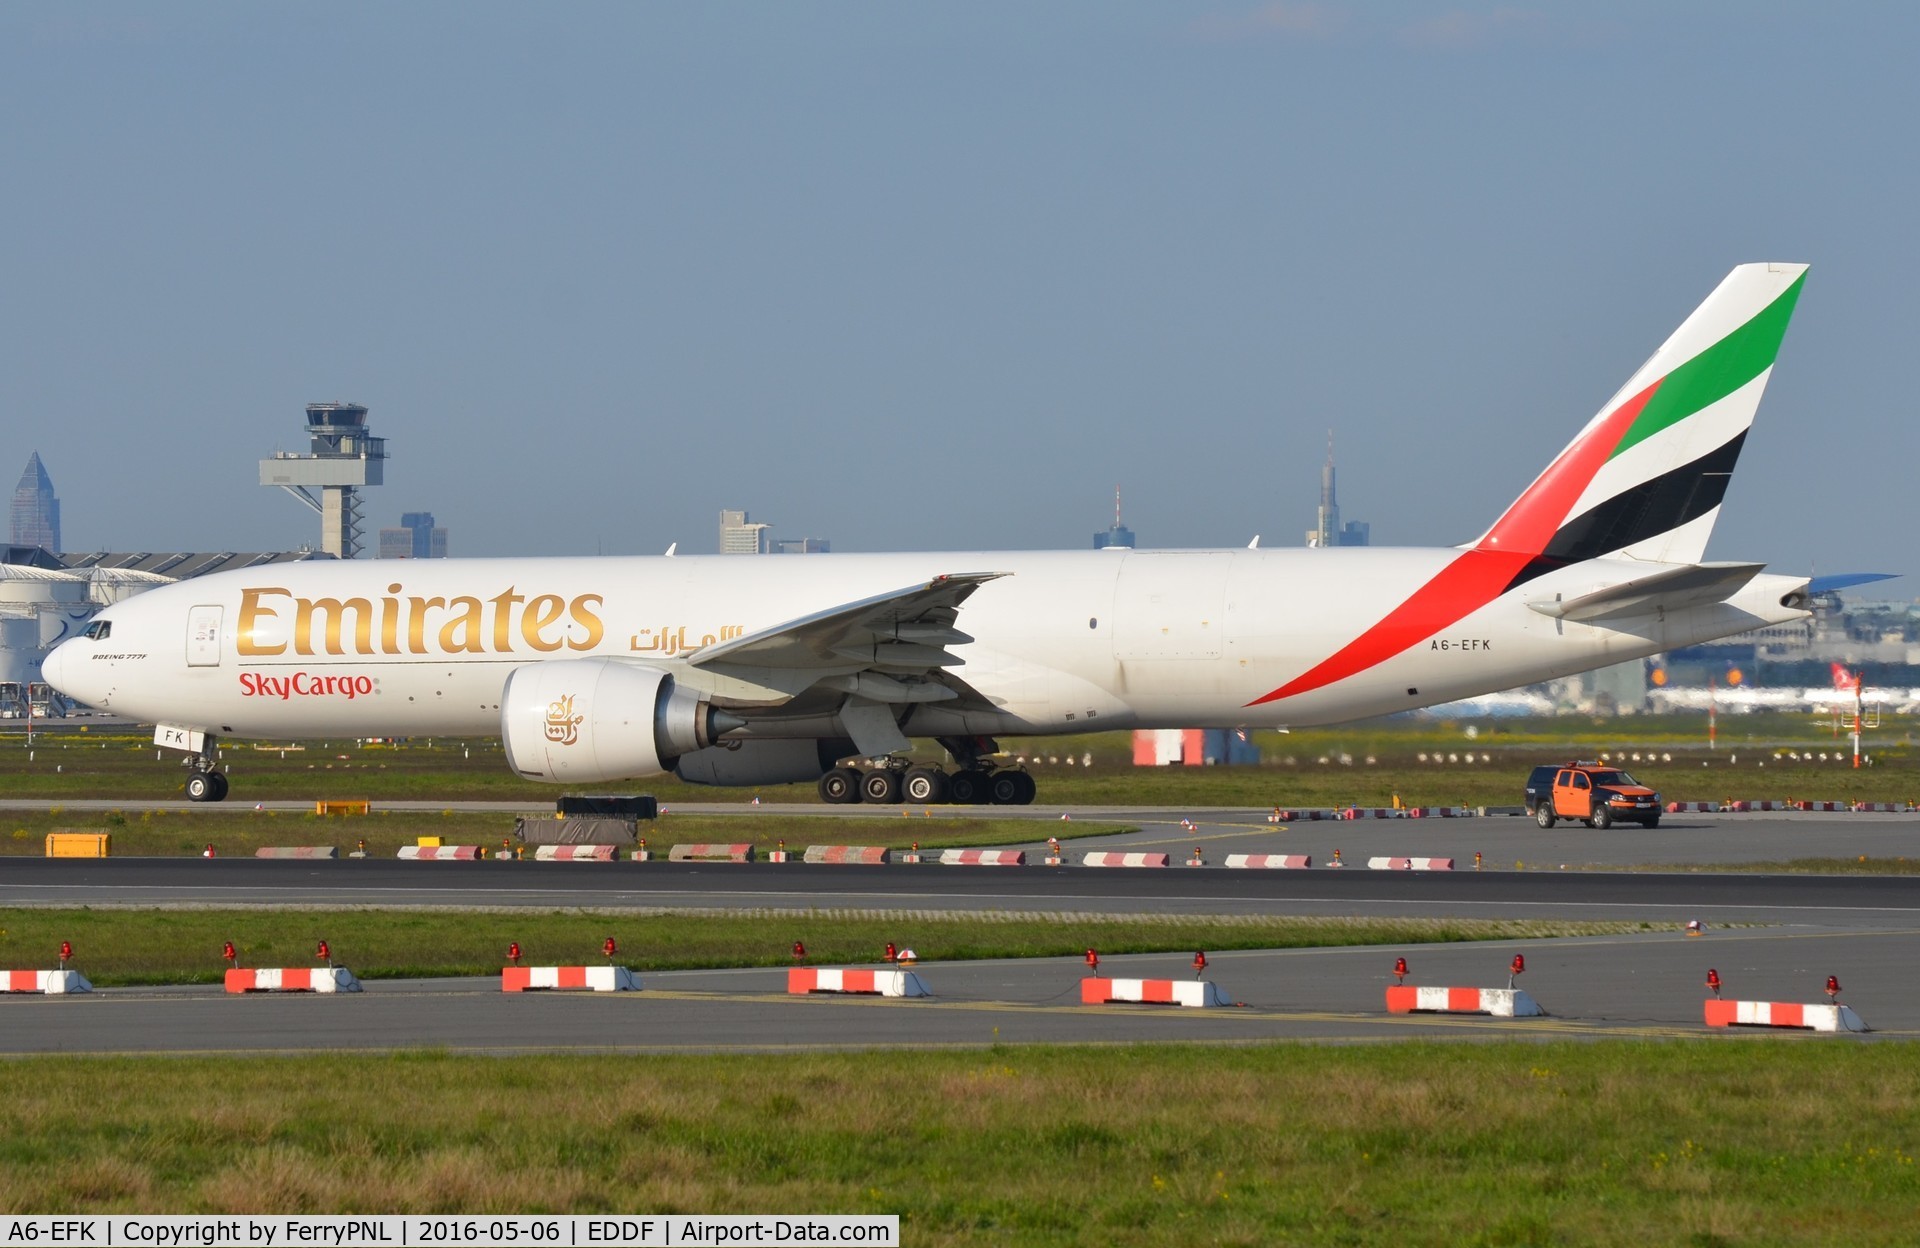 A6-EFK, 2013 Boeing 777-F1H C/N 35611, Emirates B772F taxiing for departure.